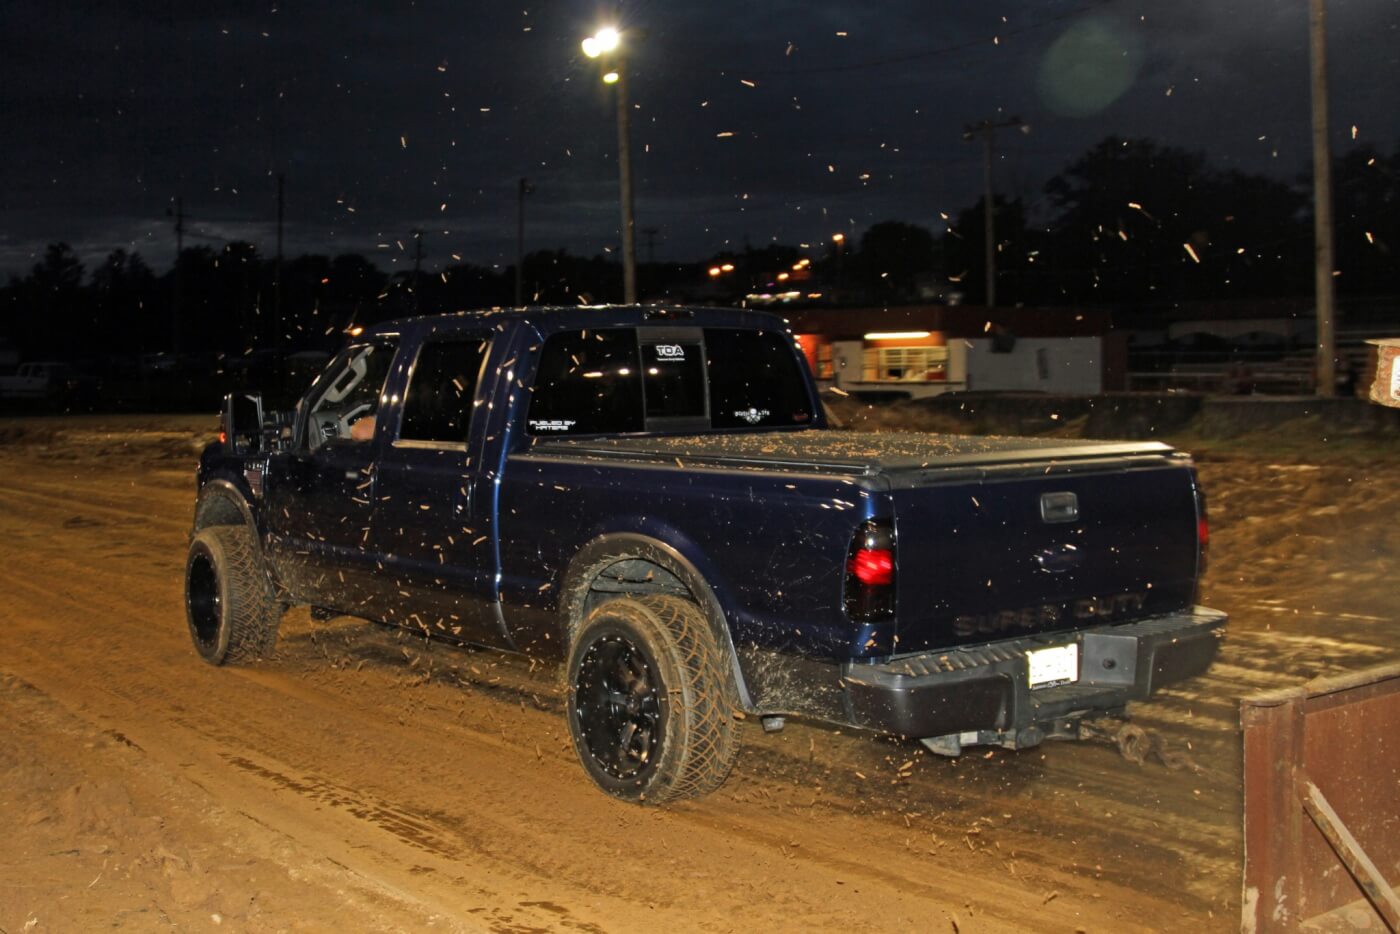 The pulling action finished under the lights. Check out the mud flying off the street tires on this 6.4L Super Duty.